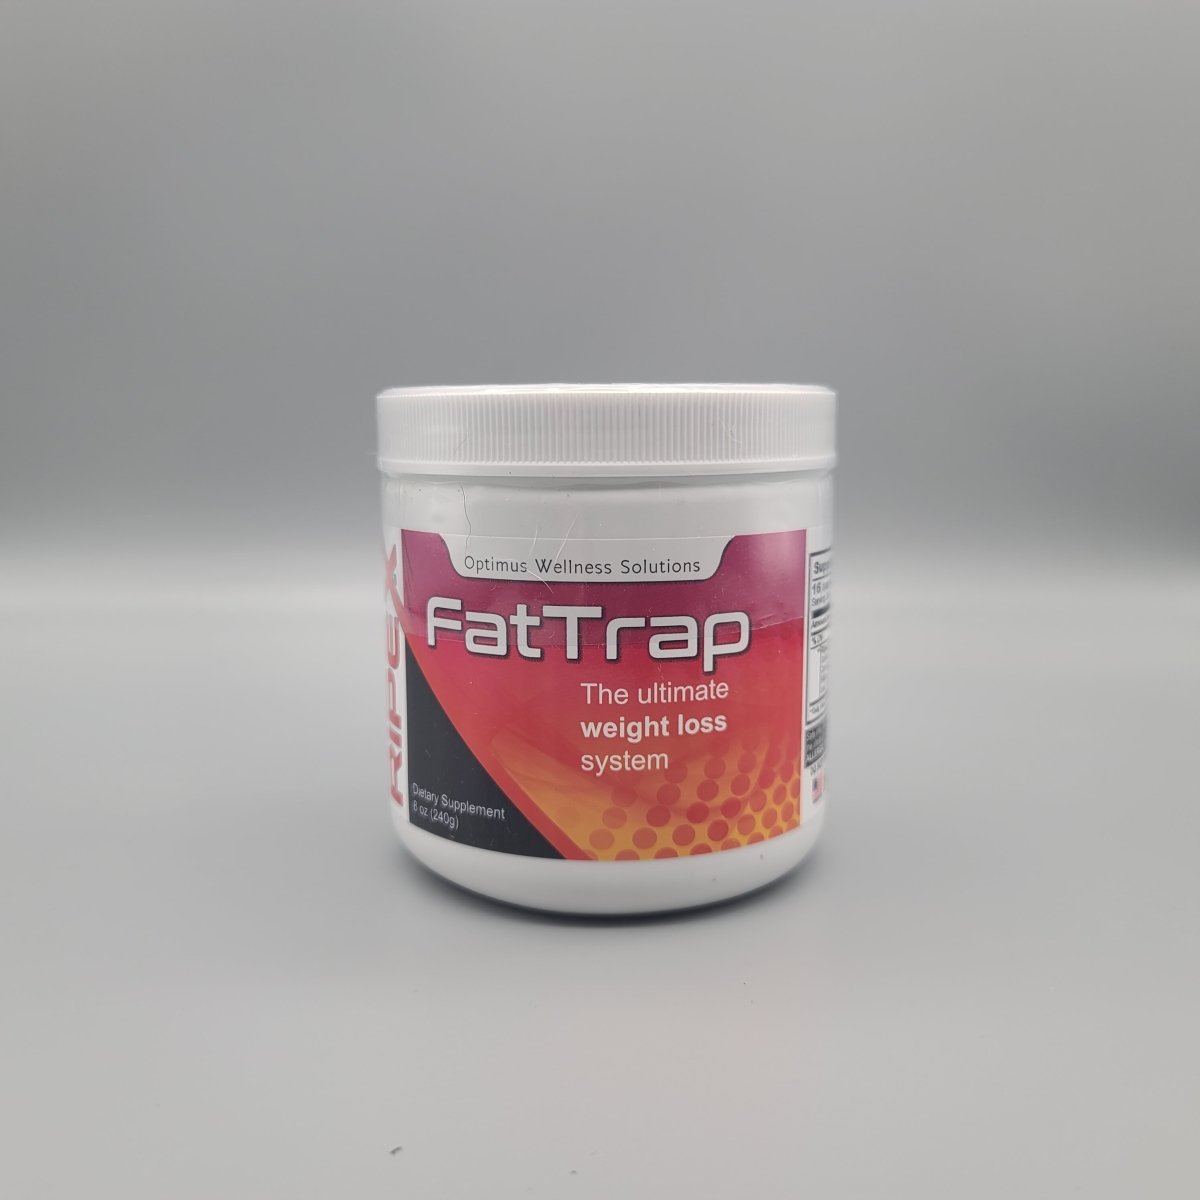 Ripex - Fat Trap - The Ultimate Weight Loss System - 8oz